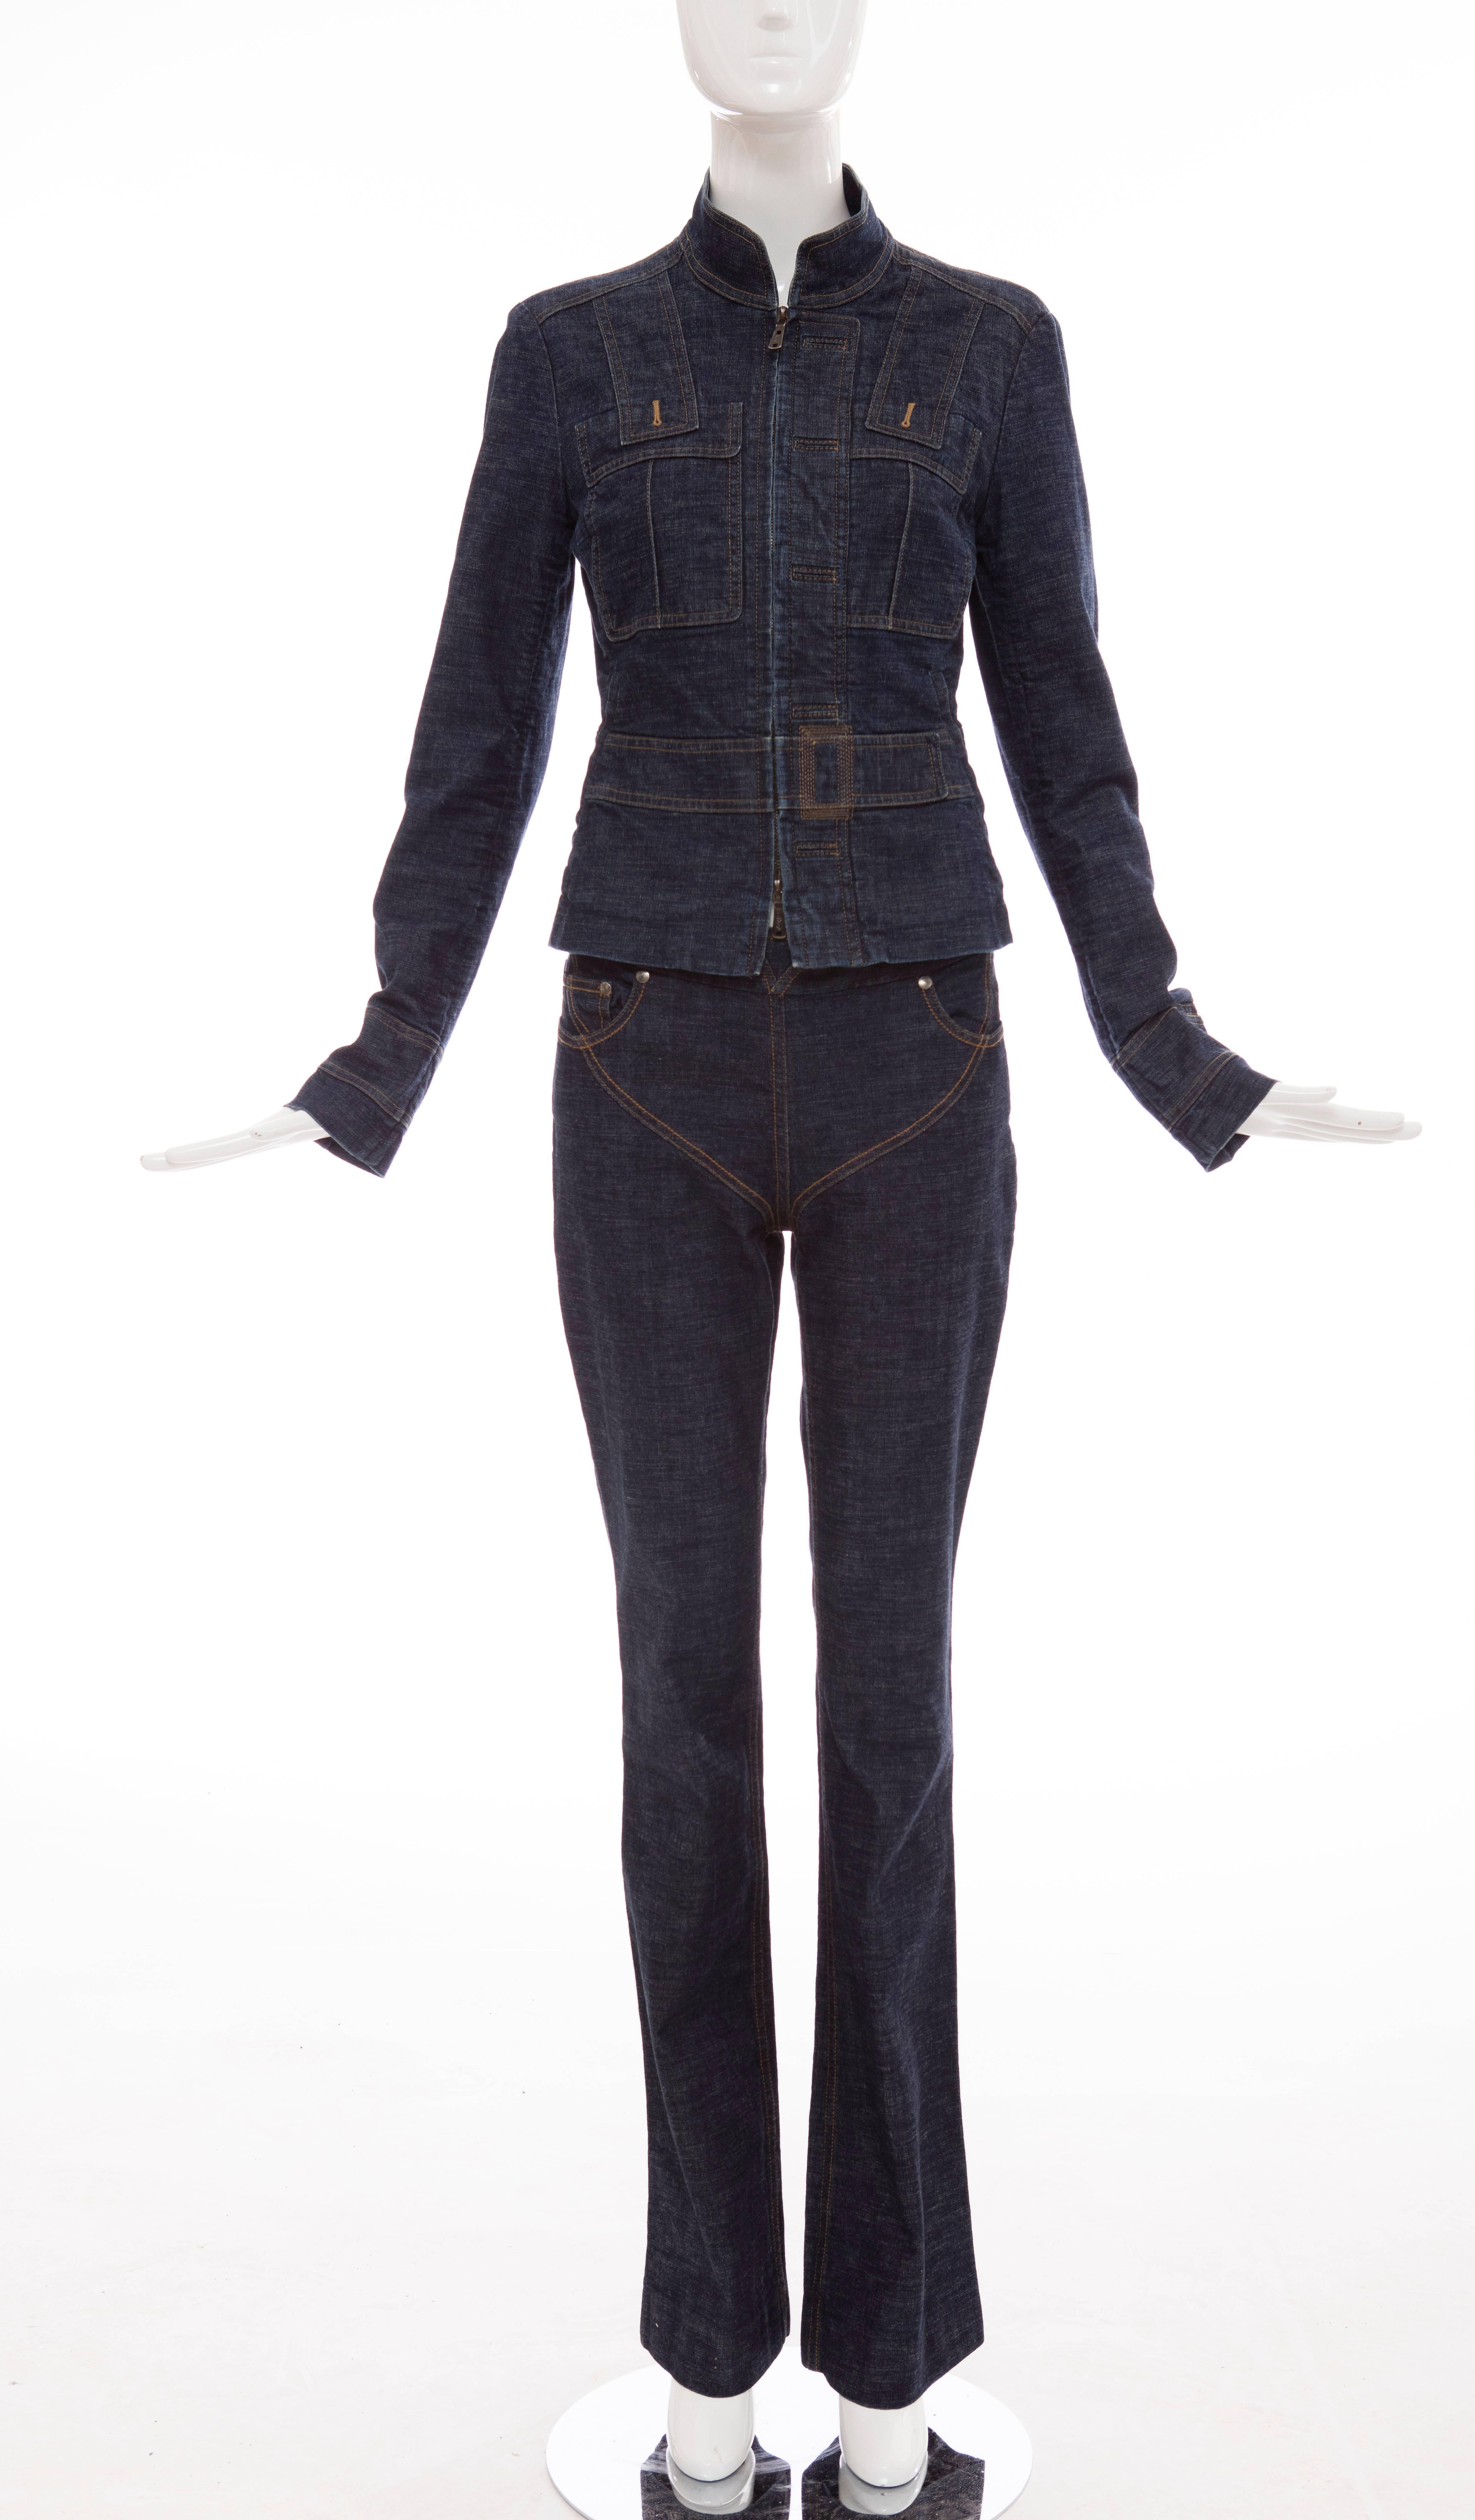  Yves Saint Laurent Rive Gauche, Circa 2003, denim pantsuit. Jacket features contrast stitching throughout with concealed zip closure at center front. Pants feature two front pockets, two back pockets, contrast stitching with heart design at center